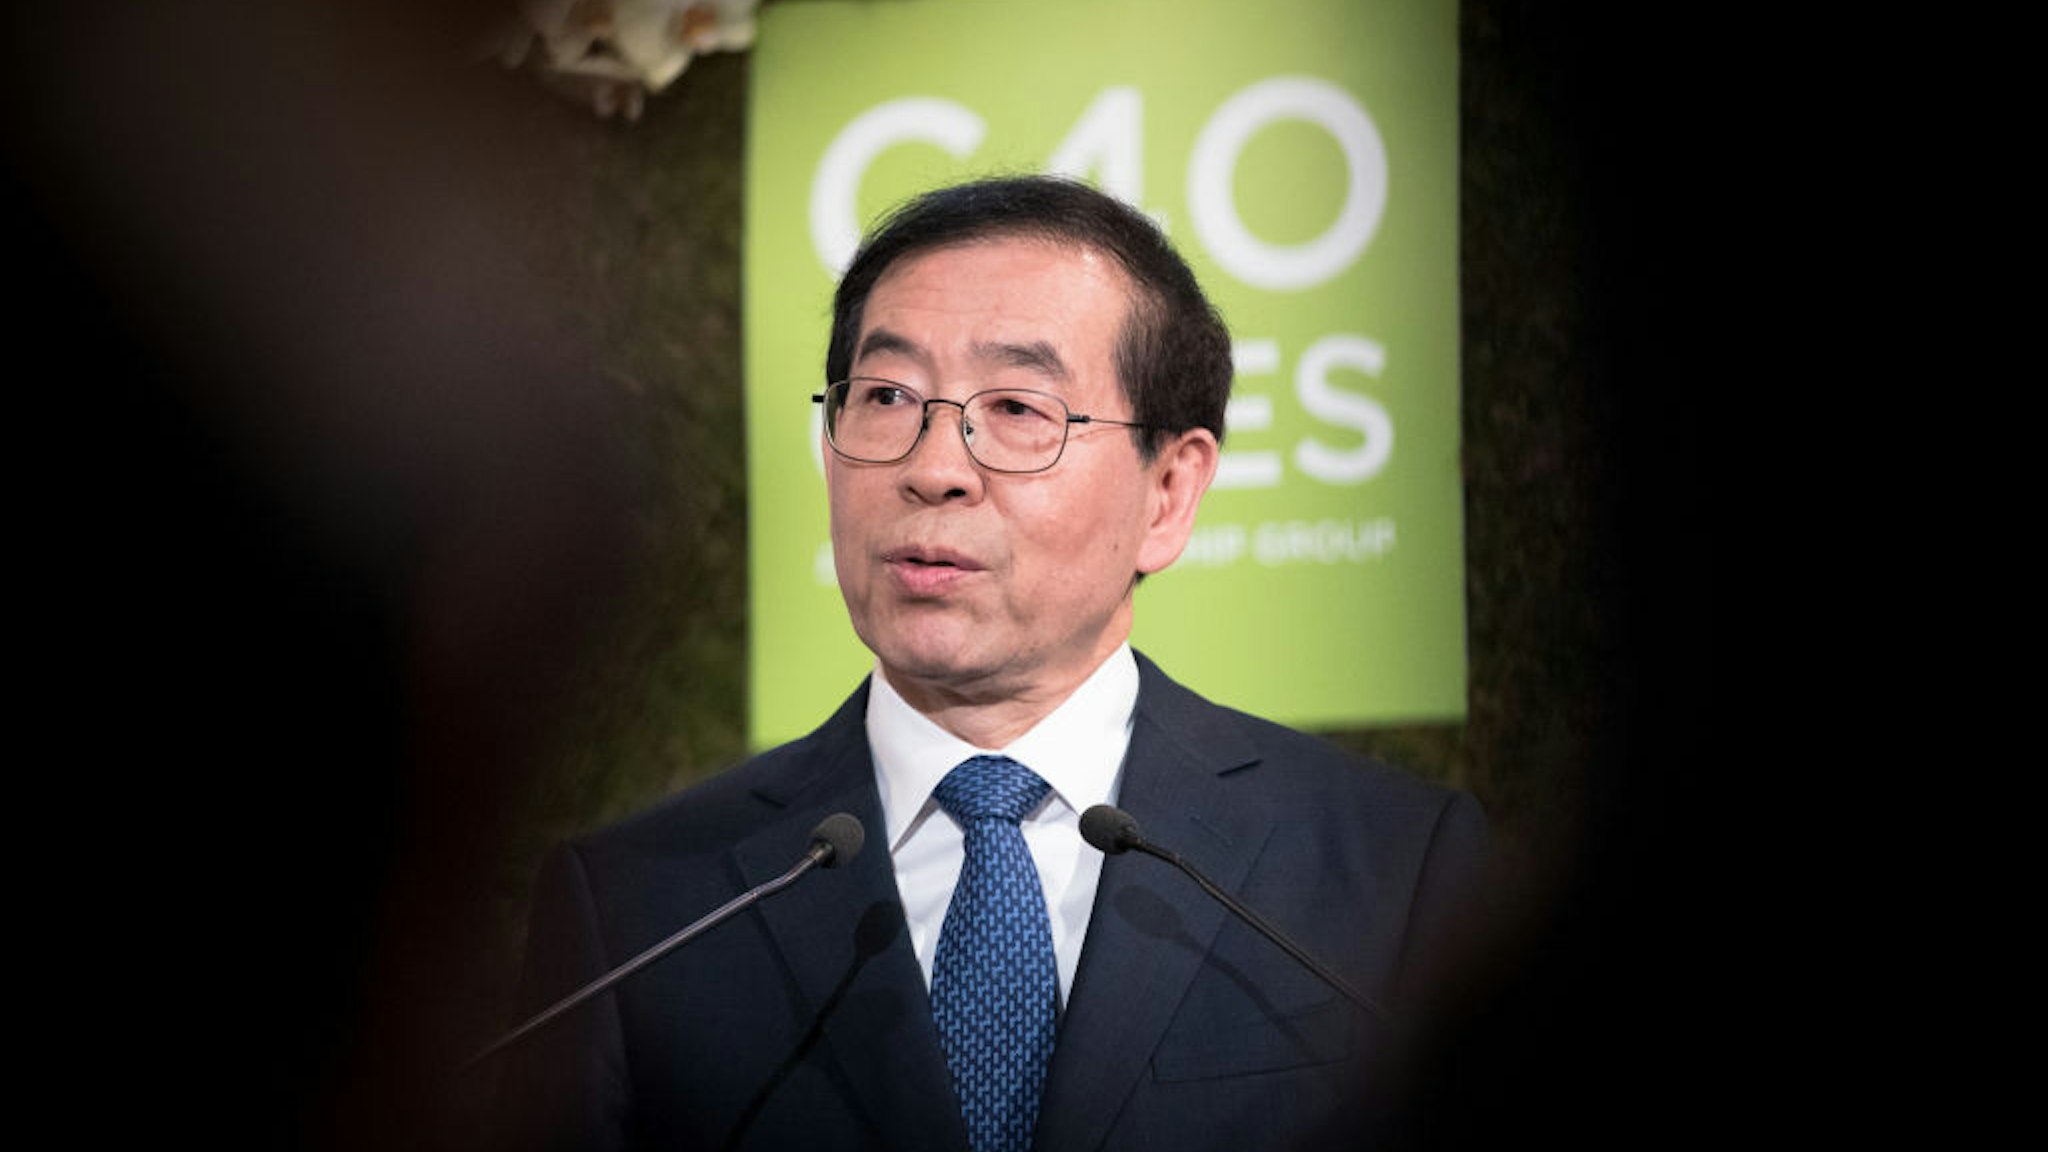 Mayor of Seoul, Park Won soon delivers a speech next to the Mayor of London, Sadiq Khan (not pictured) and Mayor of Paris and Head of C40 (a grouping of 90 megacities that want to act for the climate), Anne Hidalgo (not pictured) at the City Hall on March 29, 2017 in Paris, France.